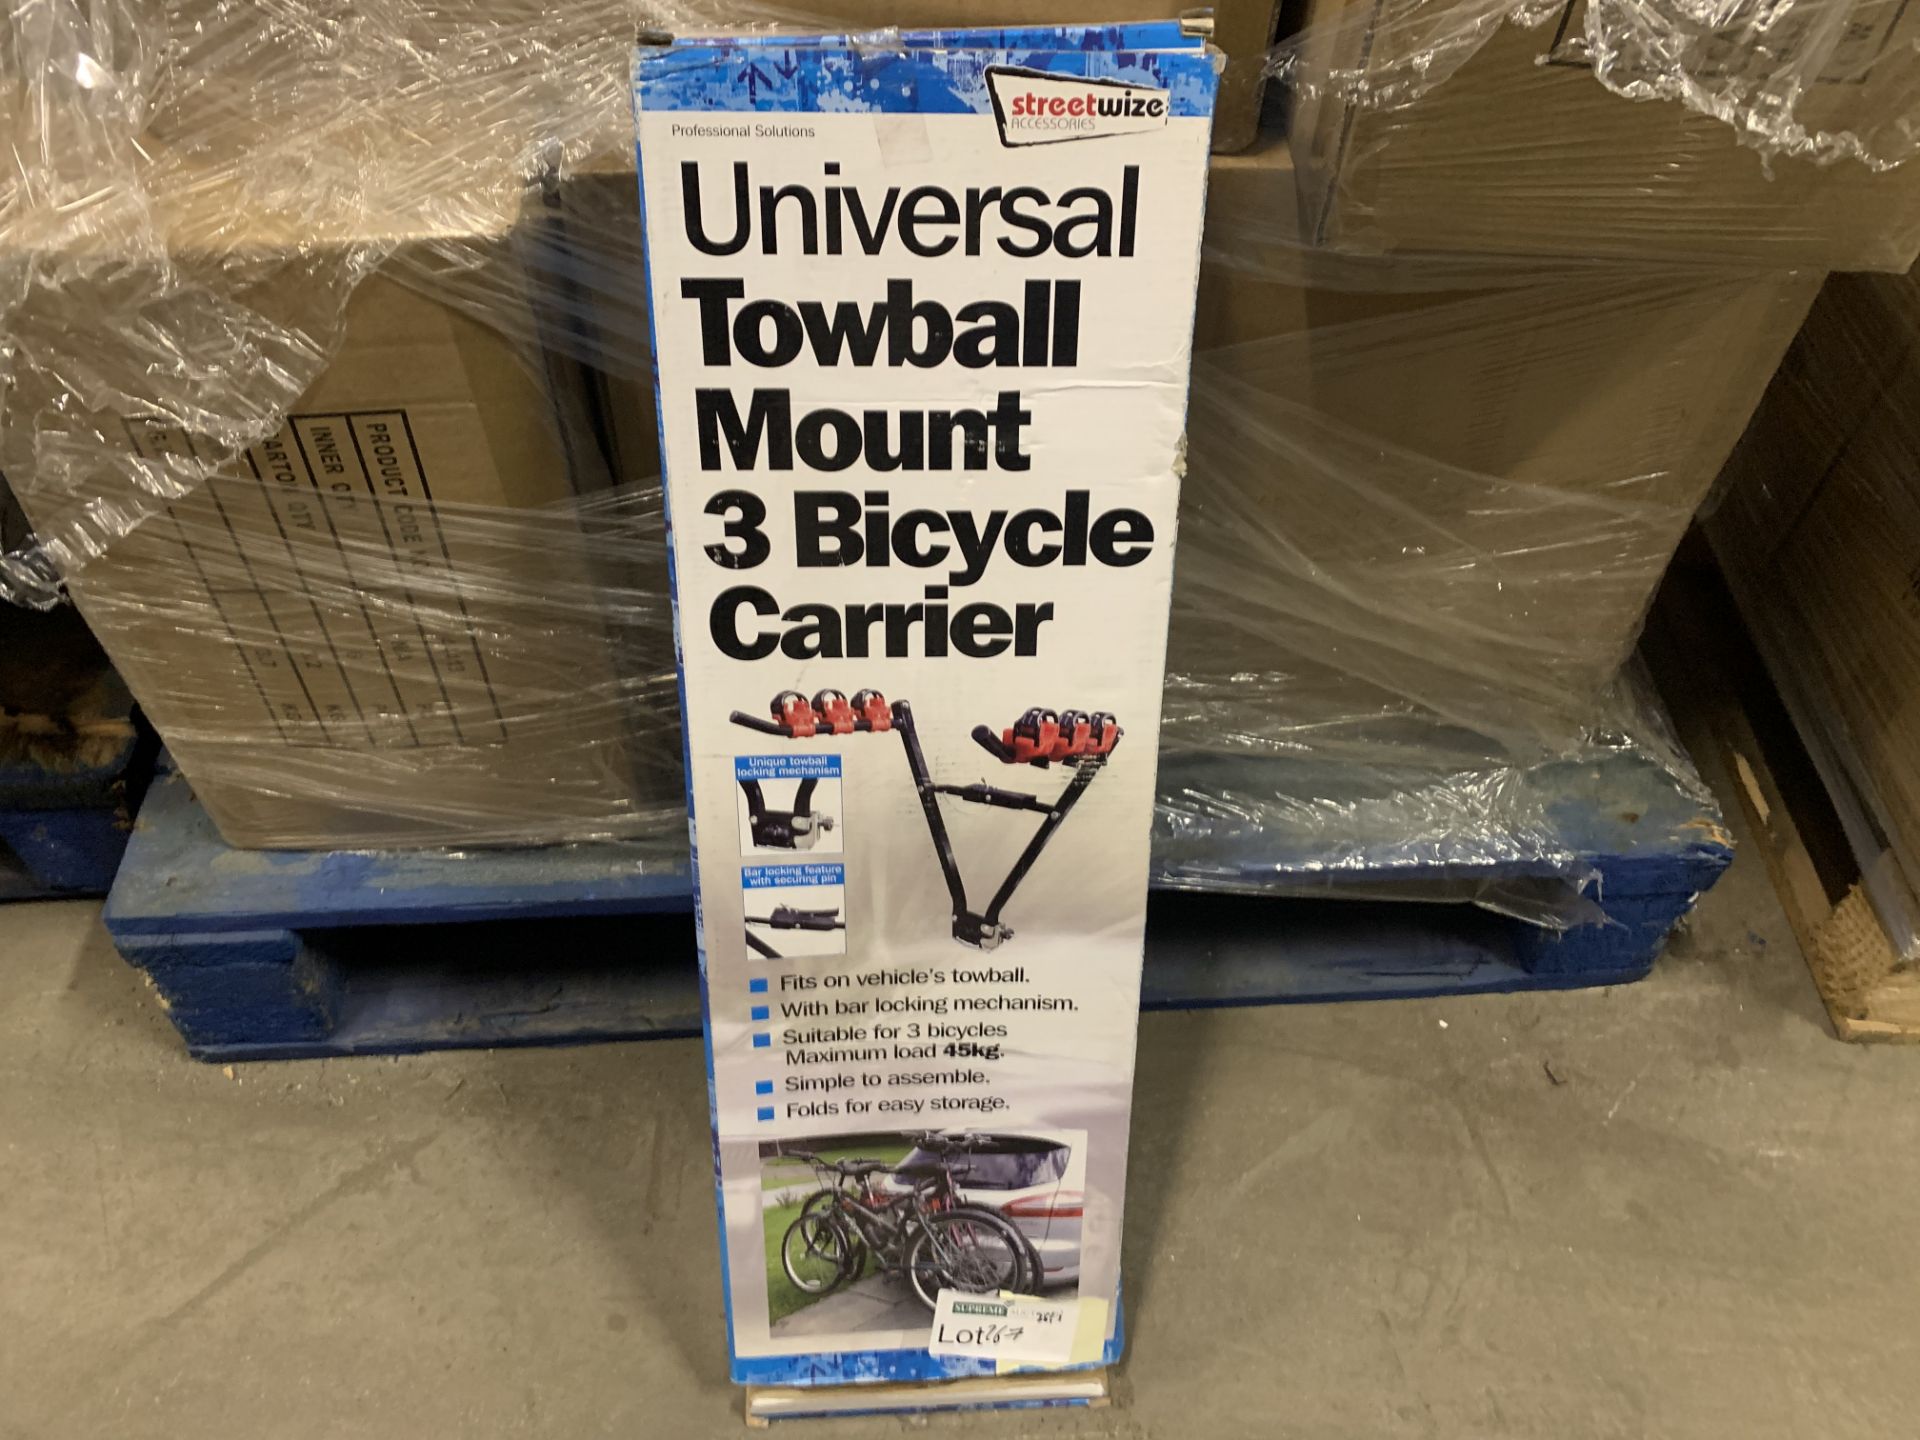 2 X BRAND NEW STREETWIZE UNIVERSA; TOWBALL MOUNT 3 BICYCLE CARRIERS